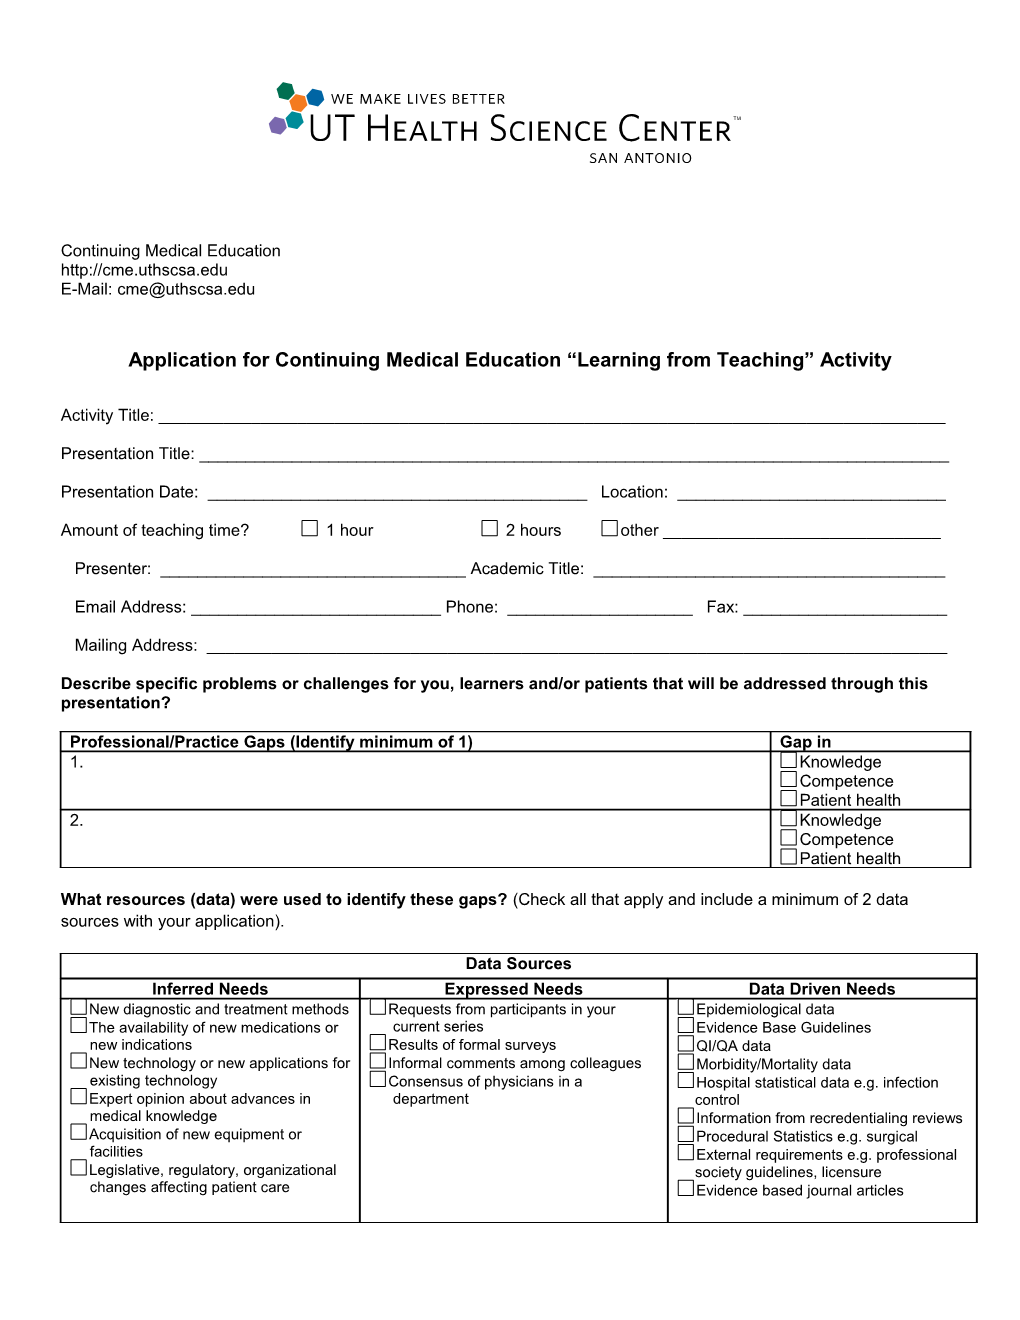 Application for Continuing Medical Education Learning from Teaching Activity